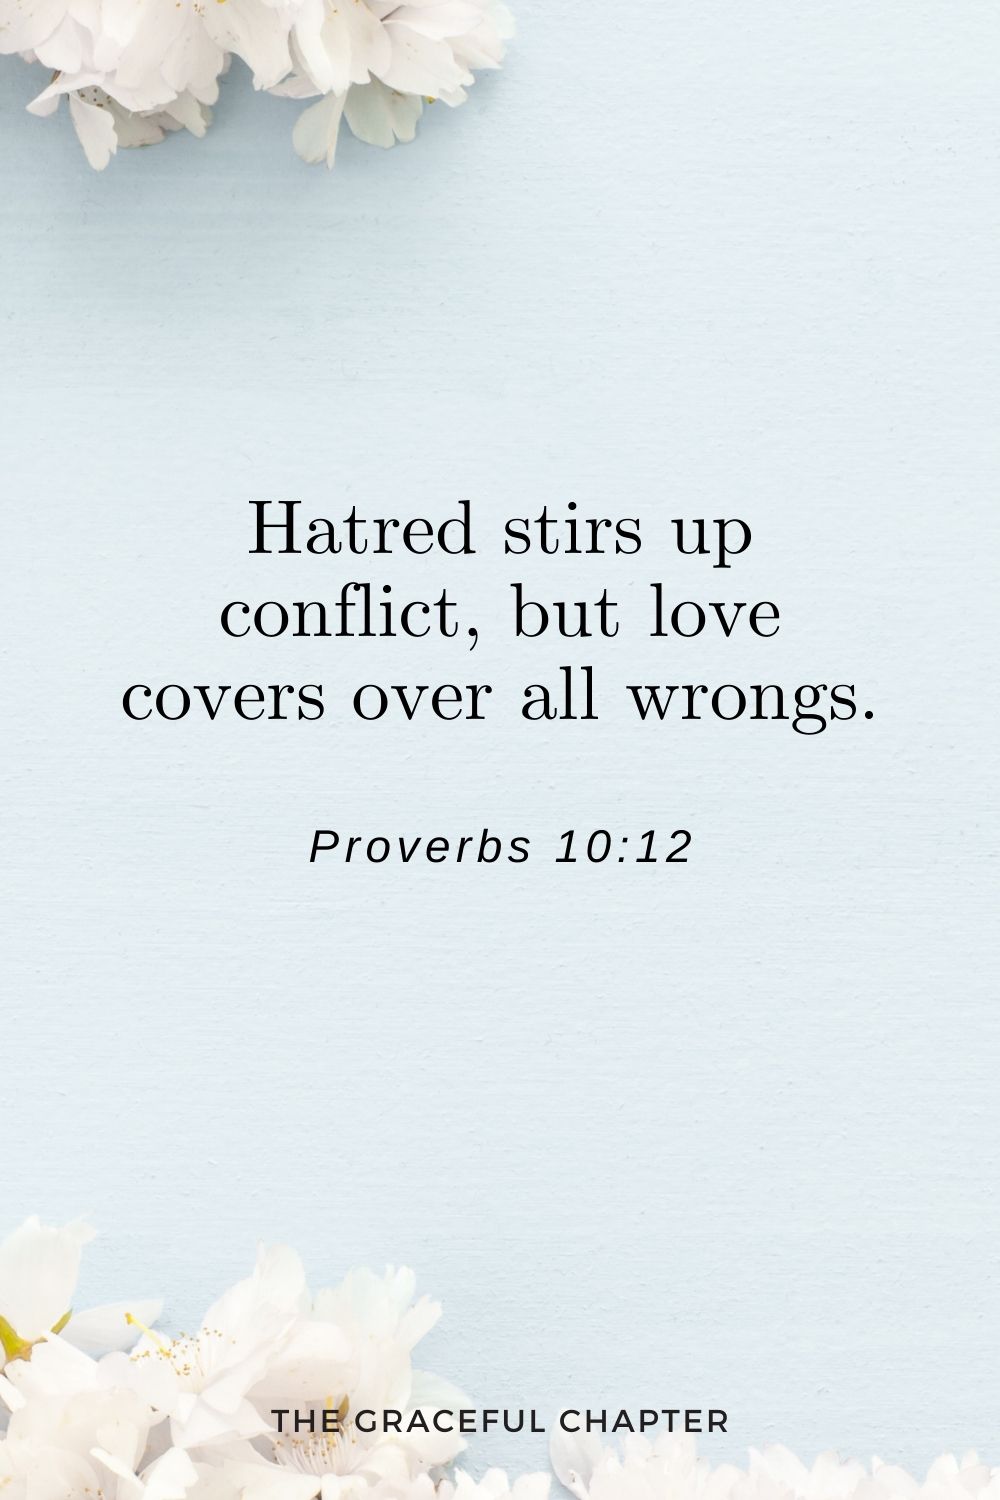 Hatred stirs up conflict, but love covers over all wrongs. Proverbs 10:12